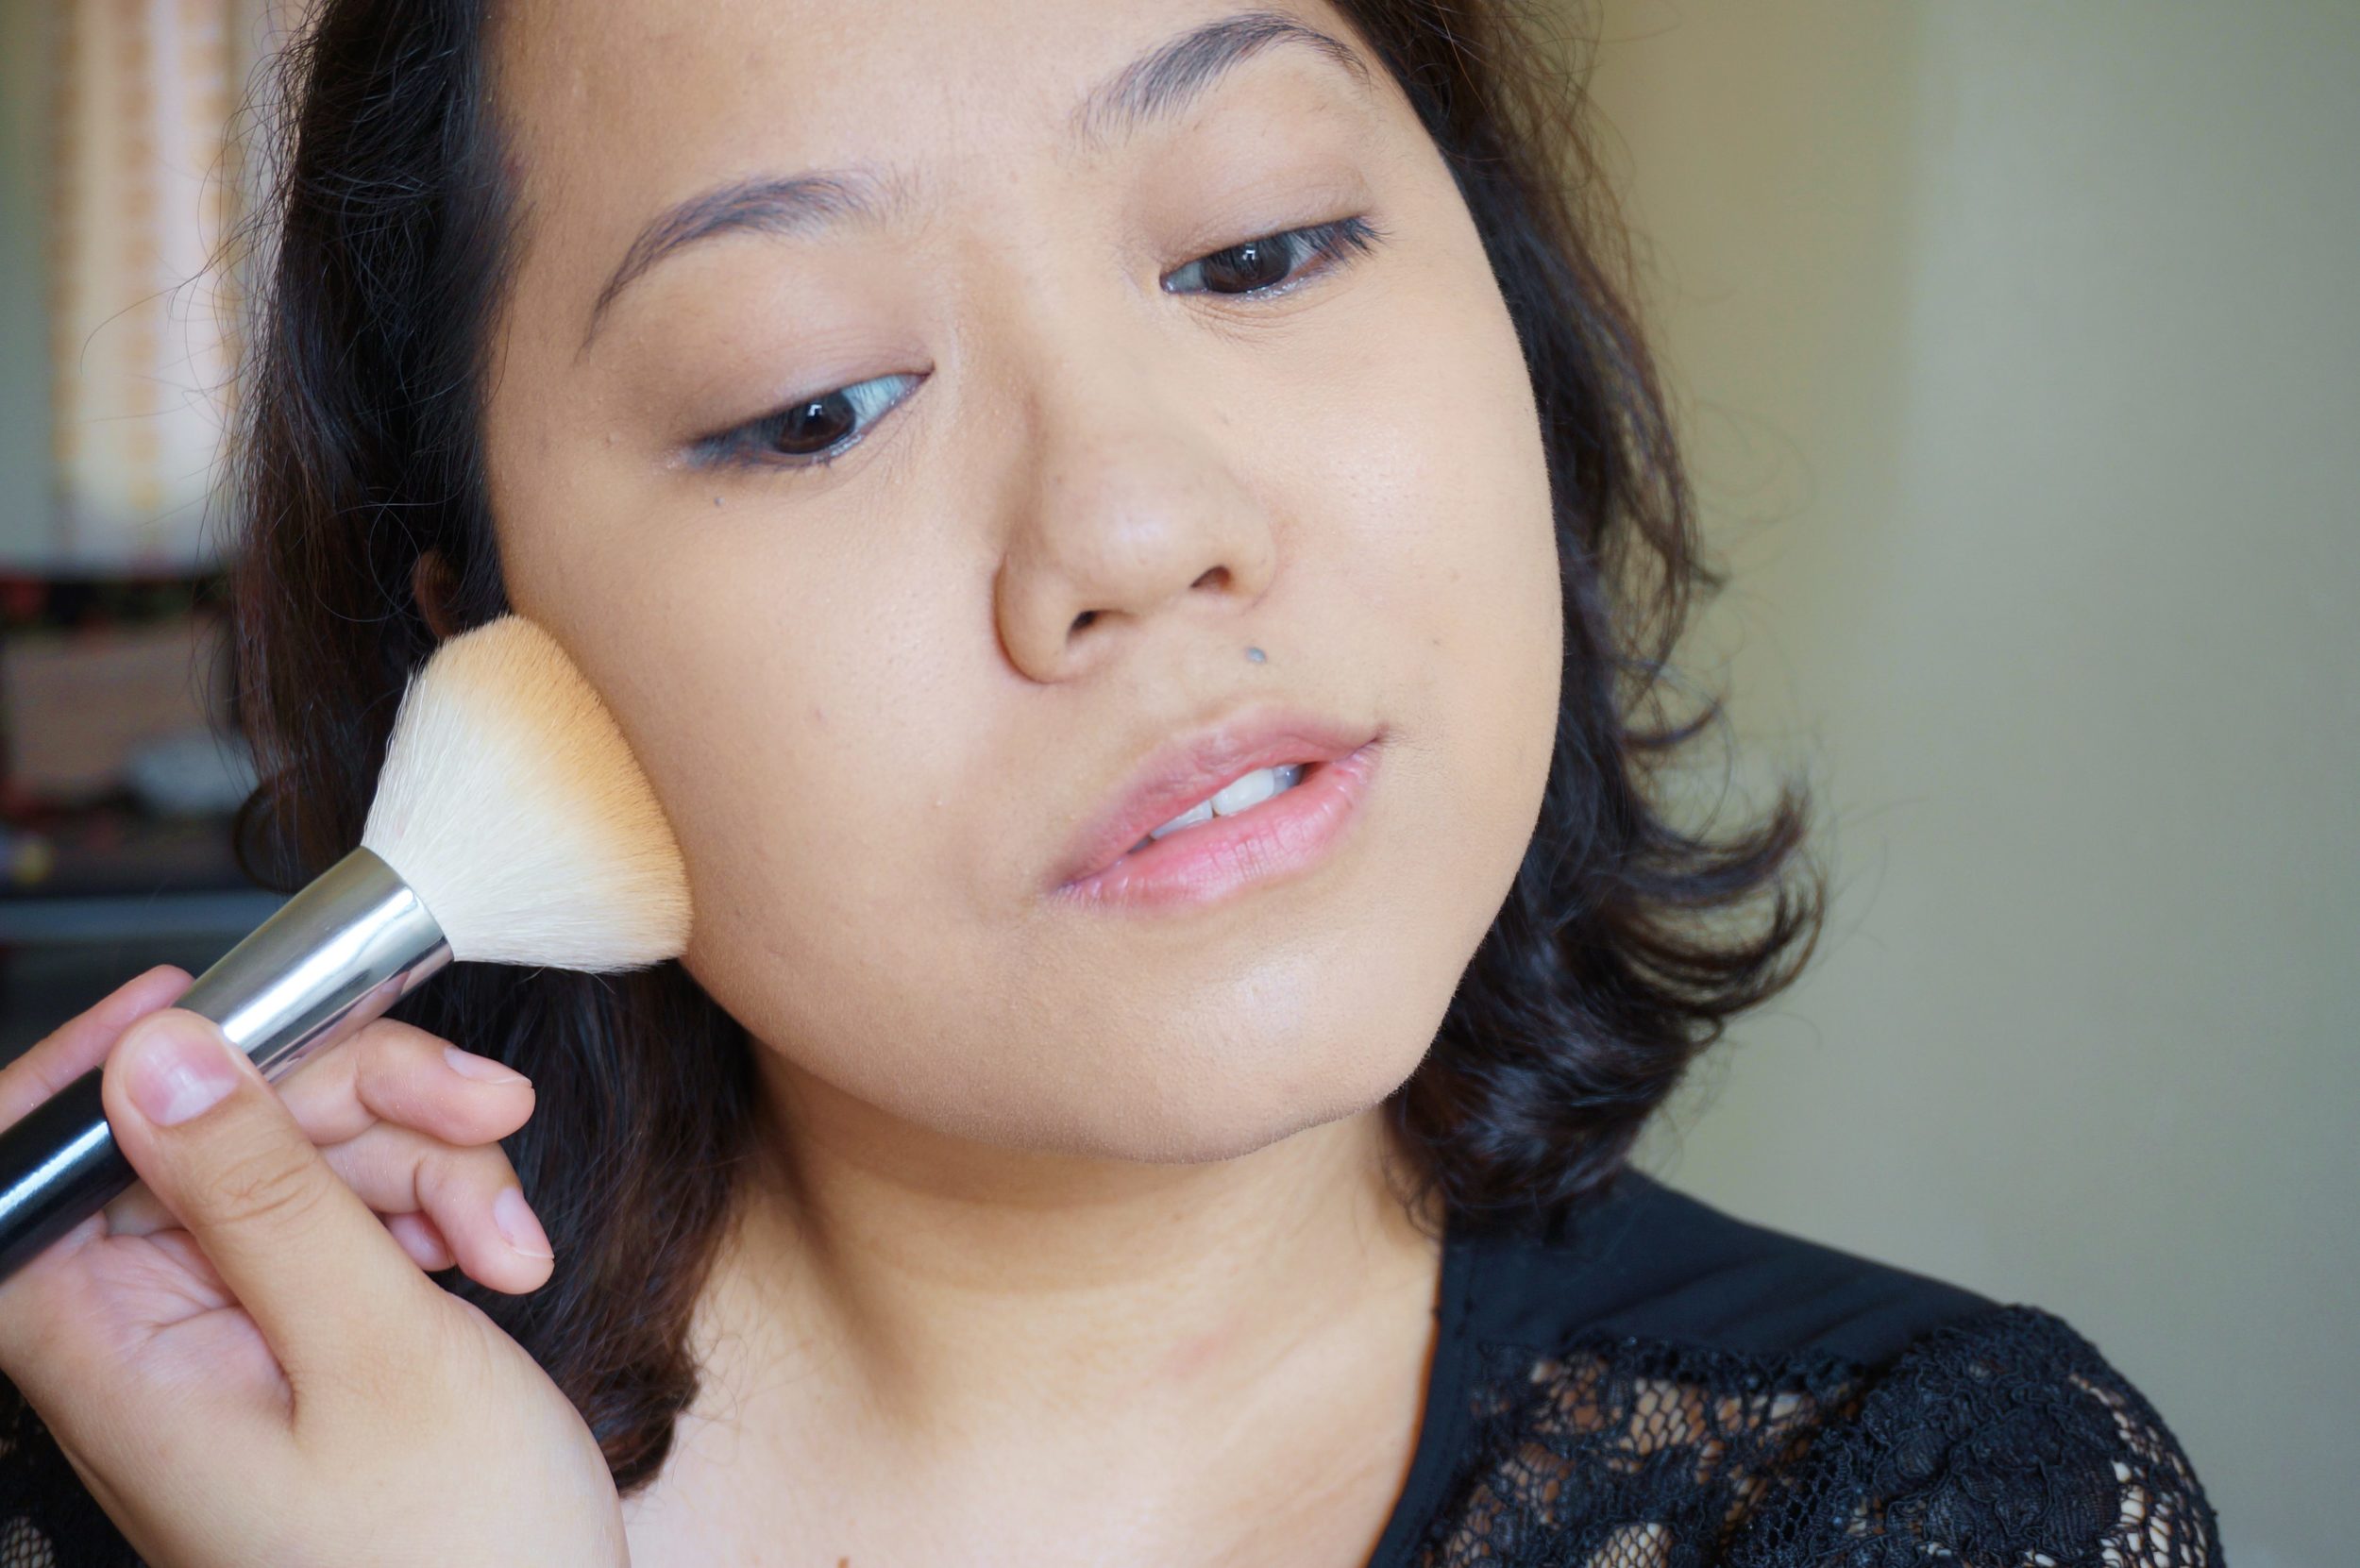  Pro tip: Apply more foundation where you have blemishes and uneven areas, and less where you have good skin.&nbsp; 